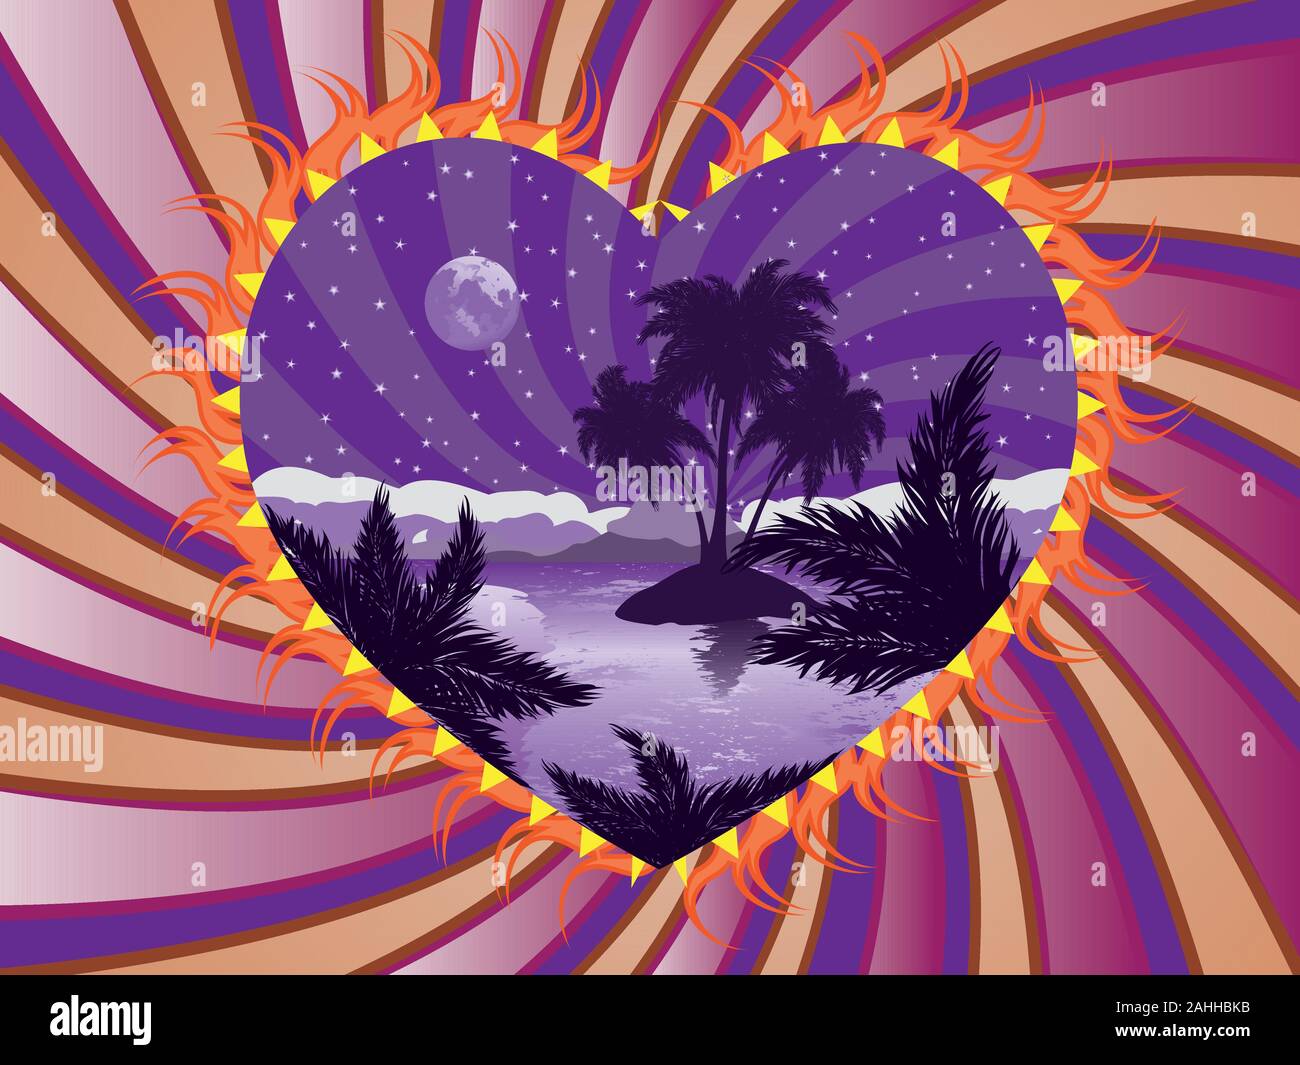 Romantic background with tropical island at night in a heart frame. Stock Vector